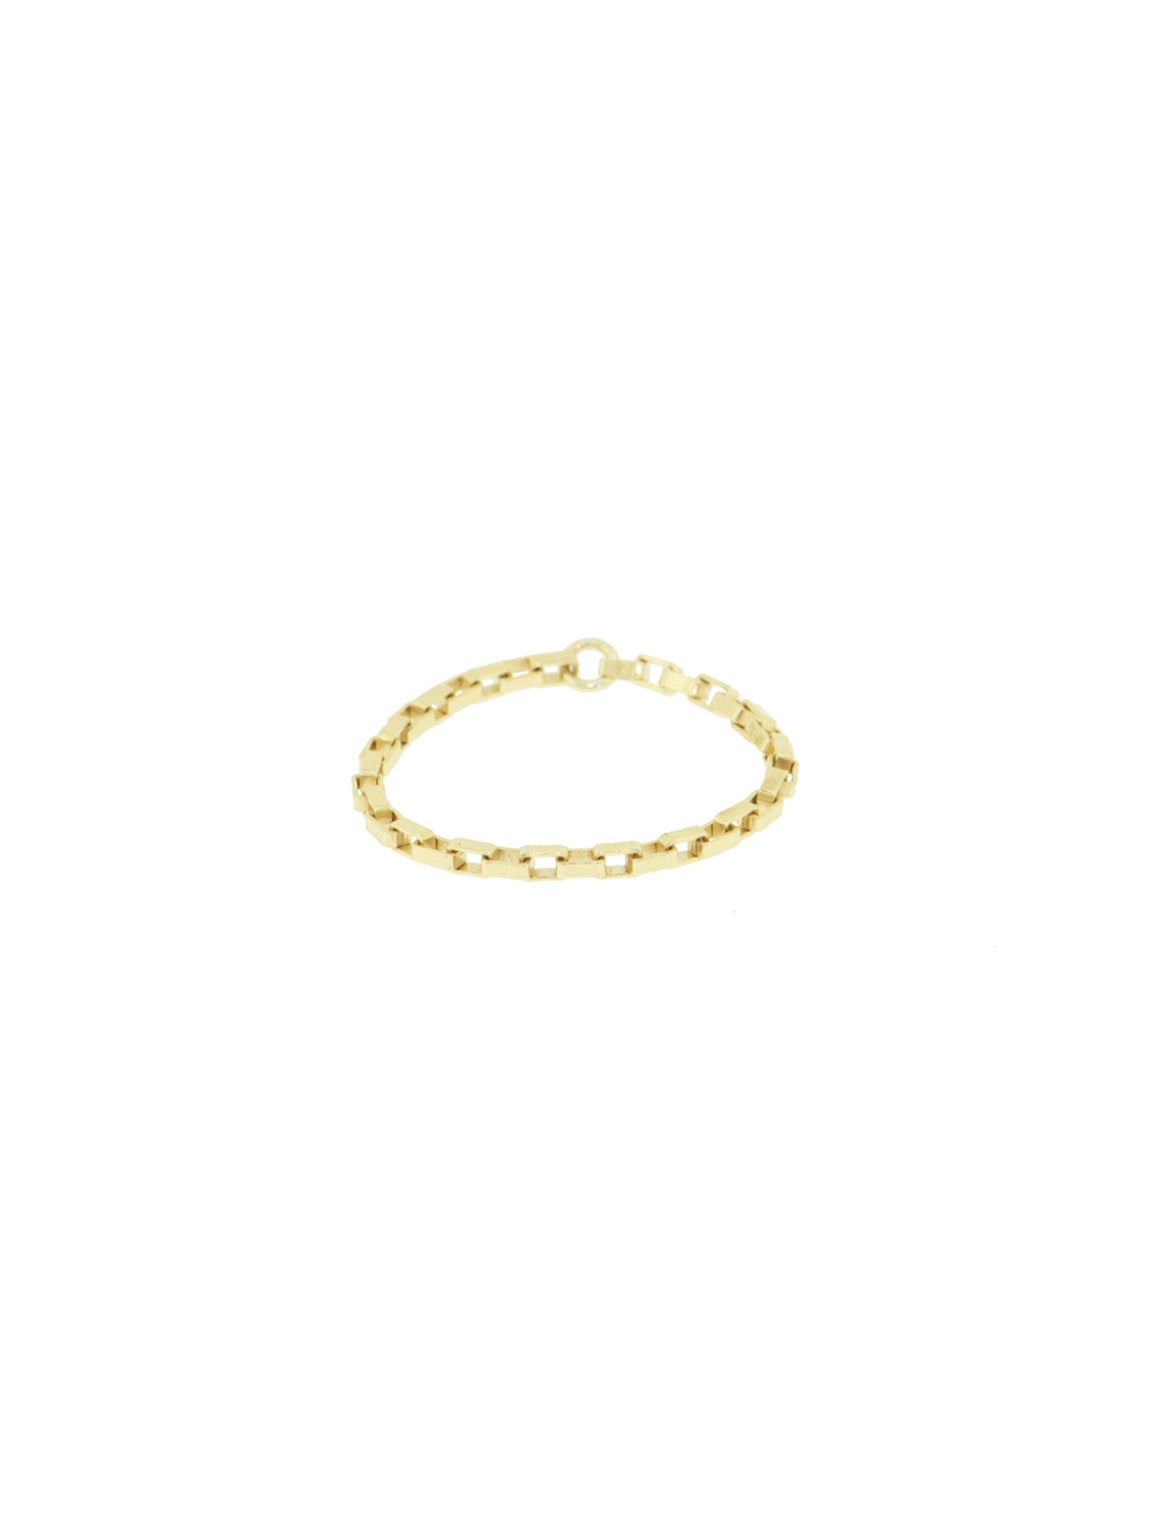 Boxy chain | 14K Gold Plated